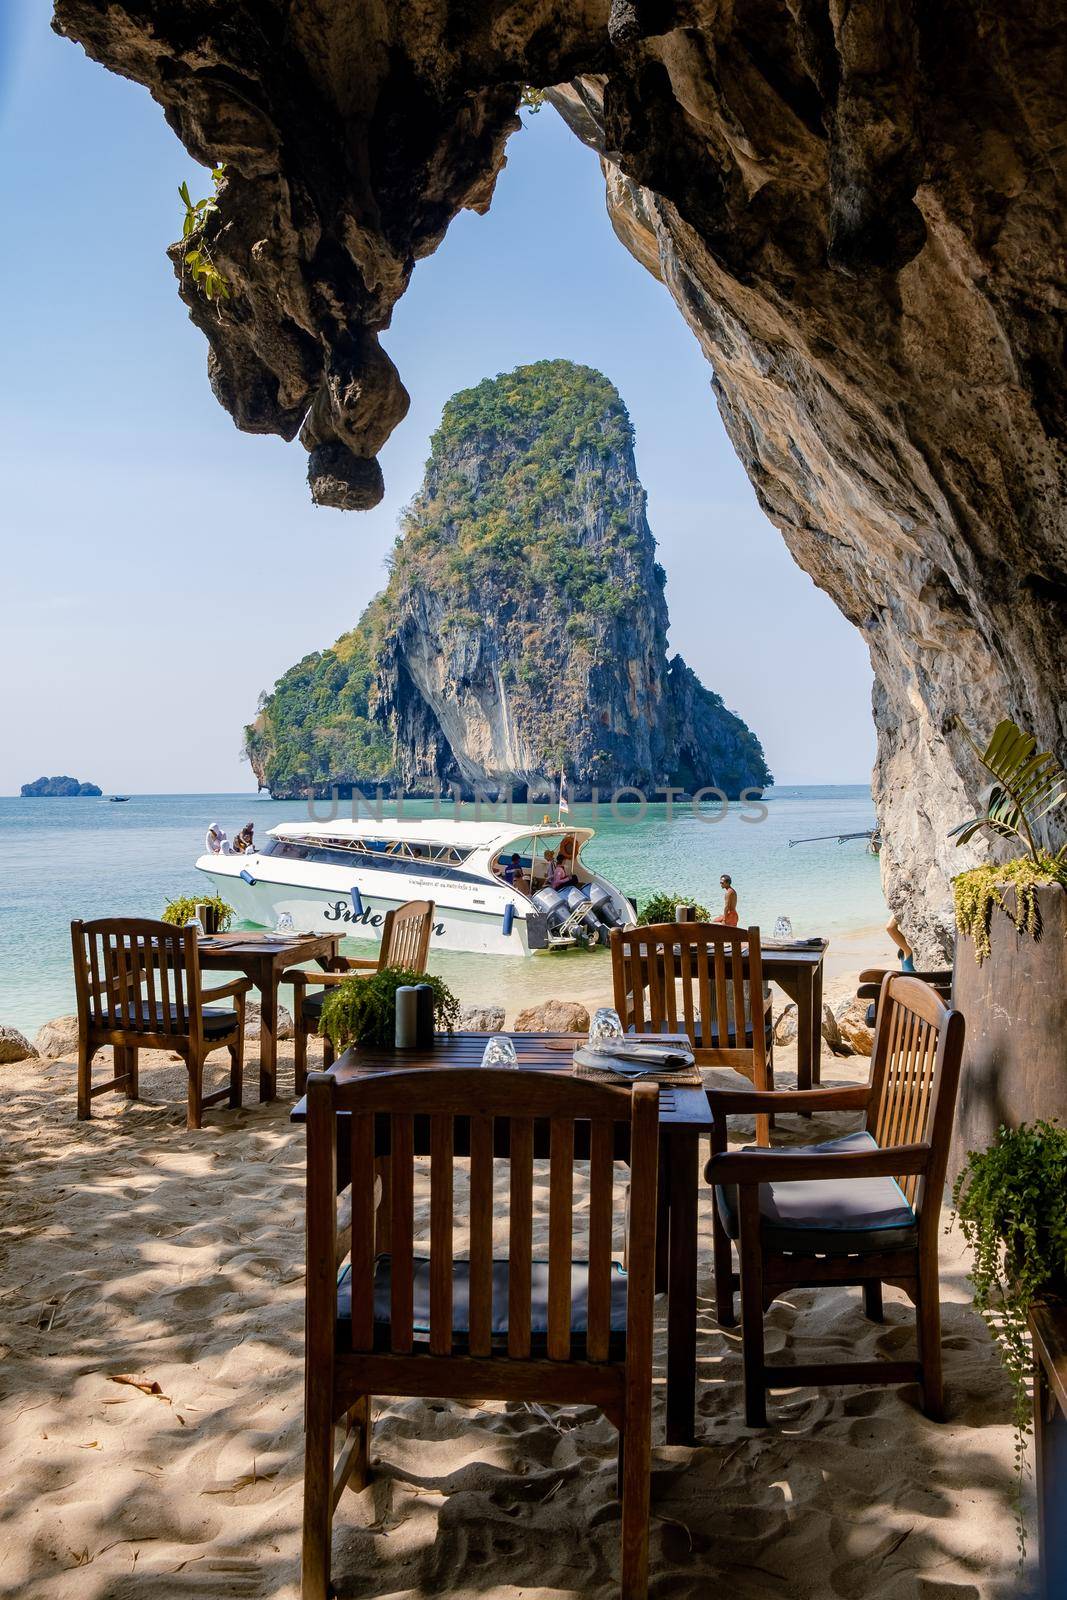 dinner tables or luch on the beach Railay beach with a beautiful backdrop of Ko Rang Nok Island In Thailand Krabi by fokkebok